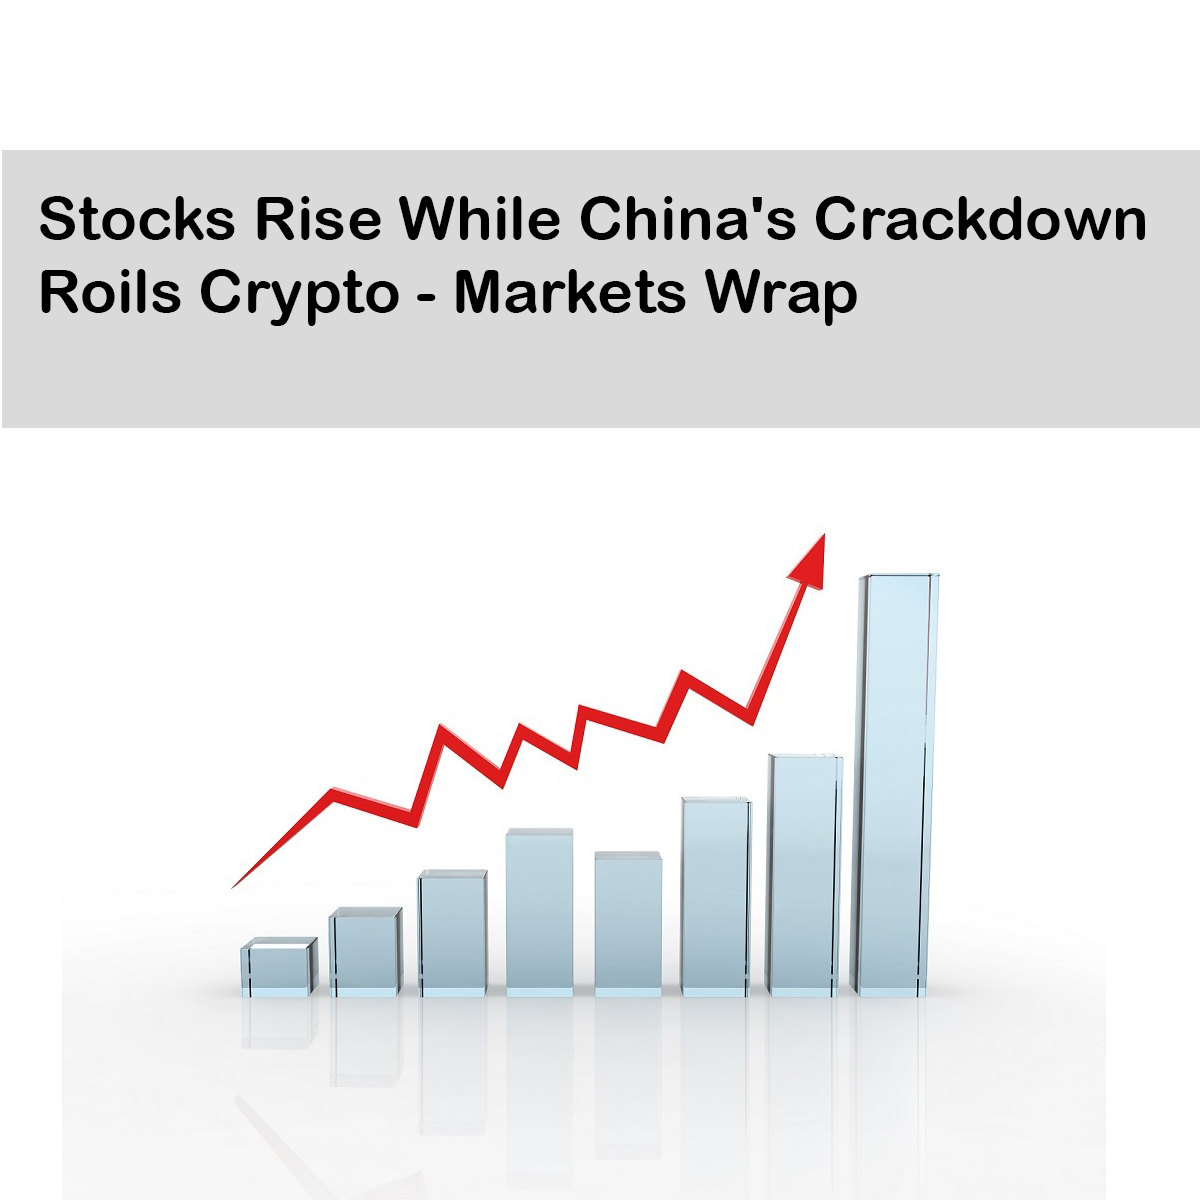 Stocks Rise While China's Crackdown Roils Crypto - Markets Wrap